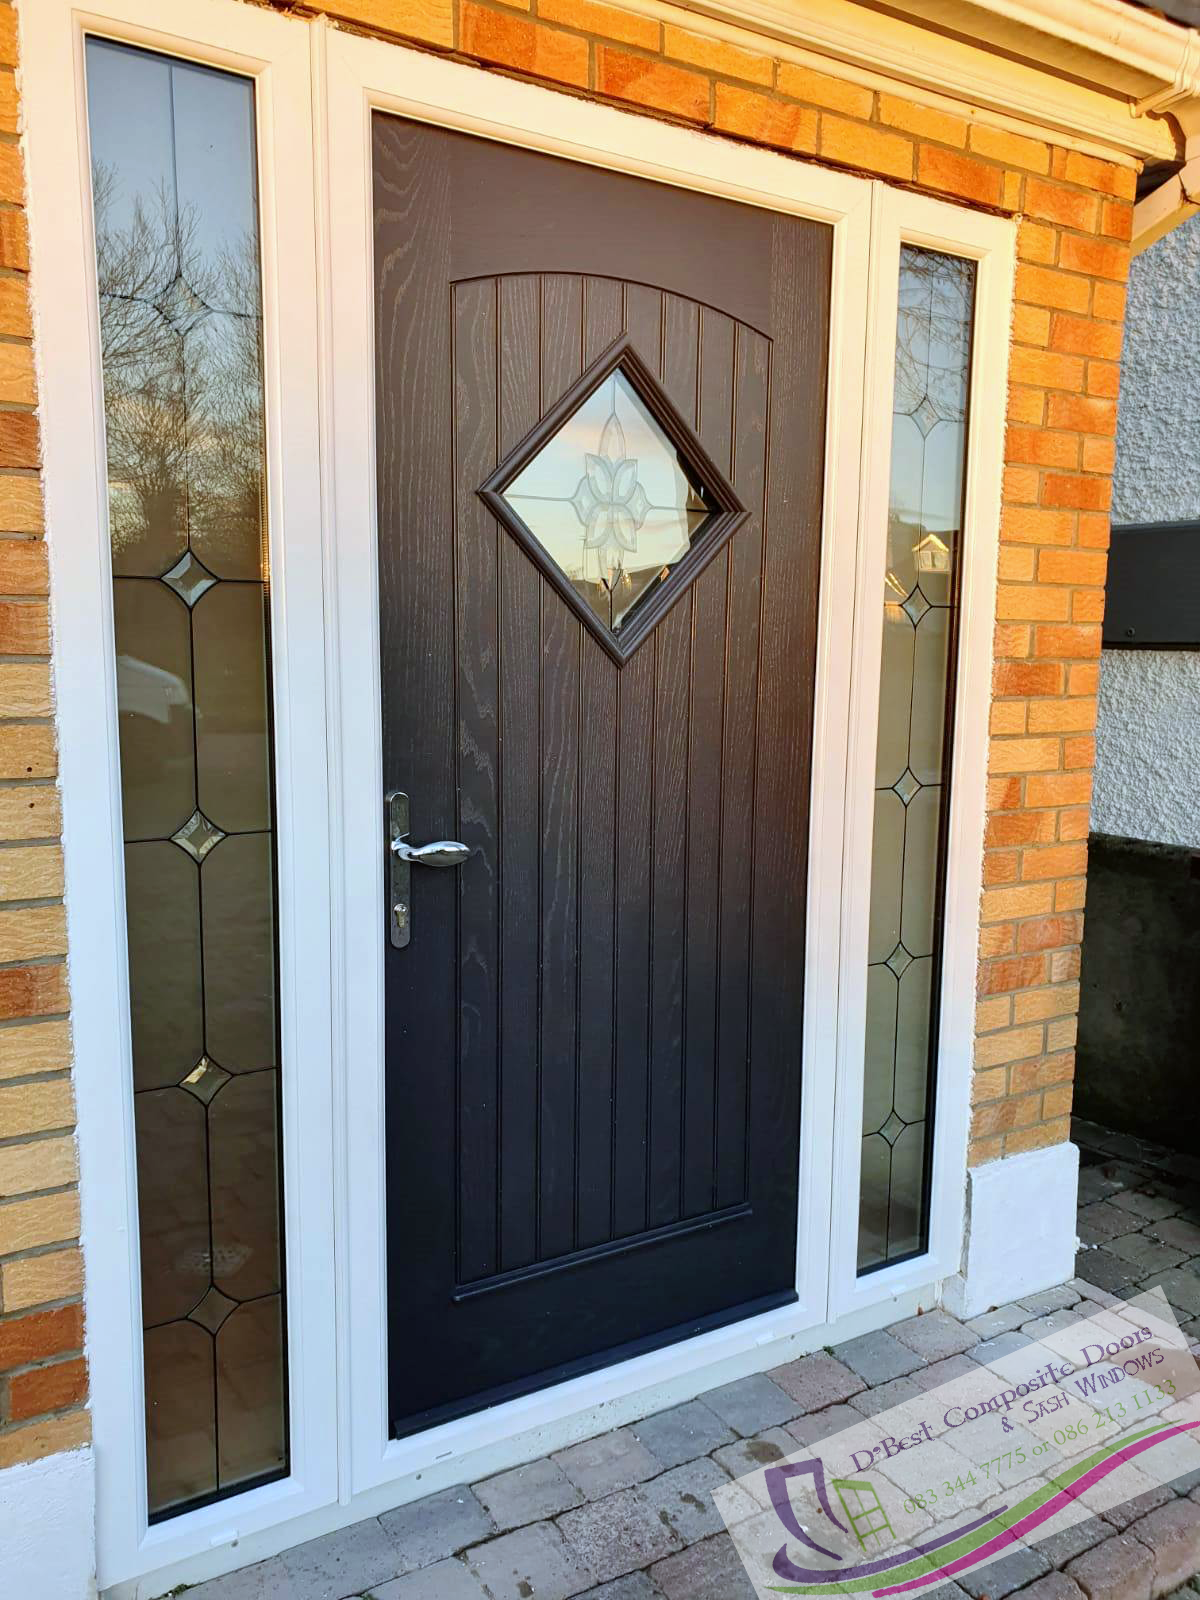 Palladio composite doors are a popular choice for homeowners due to their durability, security, and energy efficiency. They are made from a combination of materials, including GRP (glass reinforced plastic), PVC, and steel, which makes them very strong and resistant to damage. Palladio composite doors also come with a variety of security features, such as multi-point locking systems and anti-drill locks. Here are some of the key features and benefits of Palladio composite doors: Durability: Palladio composite doors are made from high-quality materials and are designed to withstand the elements. They are resistant to rot, warping, and cracking, and they require very little maintenance. Security: Palladio composite doors come with a variety of security features, such as multi-point locking systems, anti-drill locks, and reinforced frames and sashes. This makes them extremely difficult to break into, making them a great choice for homeowners who are concerned about security. Energy efficiency: Palladio composite doors are highly energy-efficient. They come with a variety of features that help to keep your home warm in the winter and cool in the summer, such as thick insulation and double-glazed windows. This can help to reduce your energy bills and save you money in the long run. If you are looking for a durable, secure, and energy-efficient door for your home, then a Palladio composite door is a great option to consider. EDINBURGH DOOR. Dublin, Clondalkin, Malahide, Clongriffin, Ballyfermot, Sandyford, Dun laoighre, city centre, Swords, Finglas, Clonee, Ballymun, Crumlin, Rathmines, Ranelagh, Goatstown, Balbriggan, Skerries, Galway, Loughrea, Athenry, Ballinasloe, Roscommon, Castlerea, Athleague. Strokestown, Rooskey, Boyle, Leitrim, Carrick on Shannon, Dromod, Mohill, Meath, Navan, Slane, Trim, Kells, Athboy, Oldcastle, Westmeath, Athlone, Mullingar, Ballynacarrigy, Killucan, Raharney, Cavan, Virginia, Shercock, Bailieborough, Kingscourt, Longford, Drumlish, Ballinalee, Granard, Ballymahon & Edgeworthstown